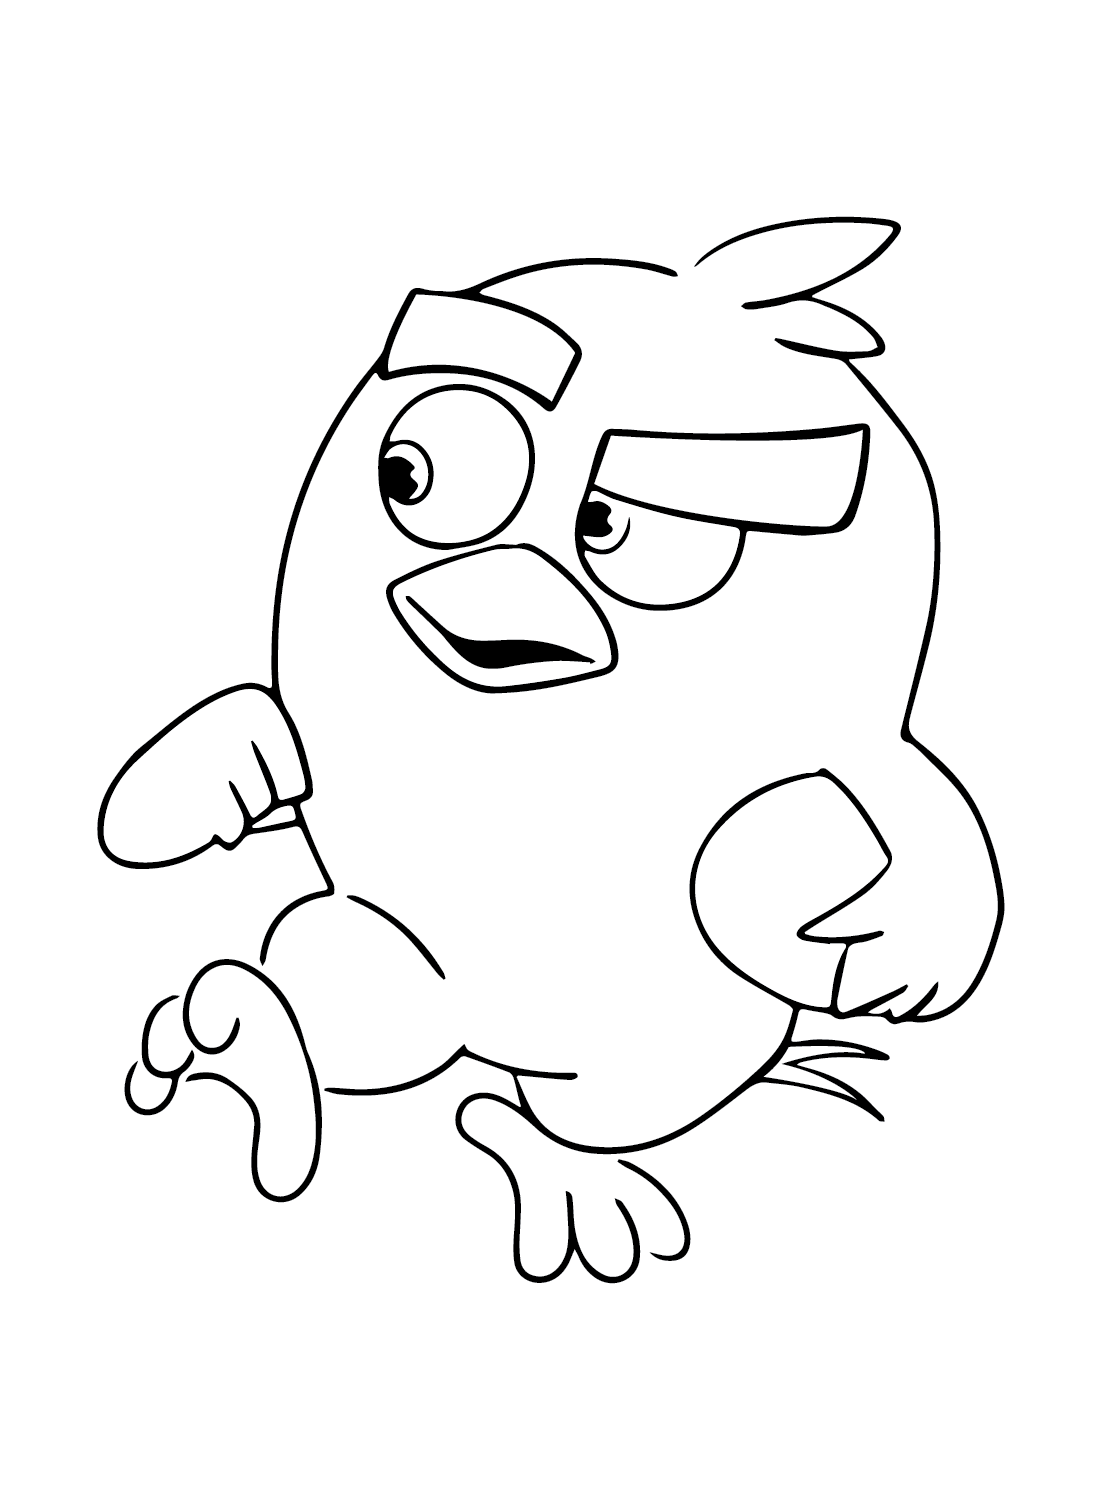 Red (Angry Bird) Images Coloring Pages - Free Printable Coloring Pages